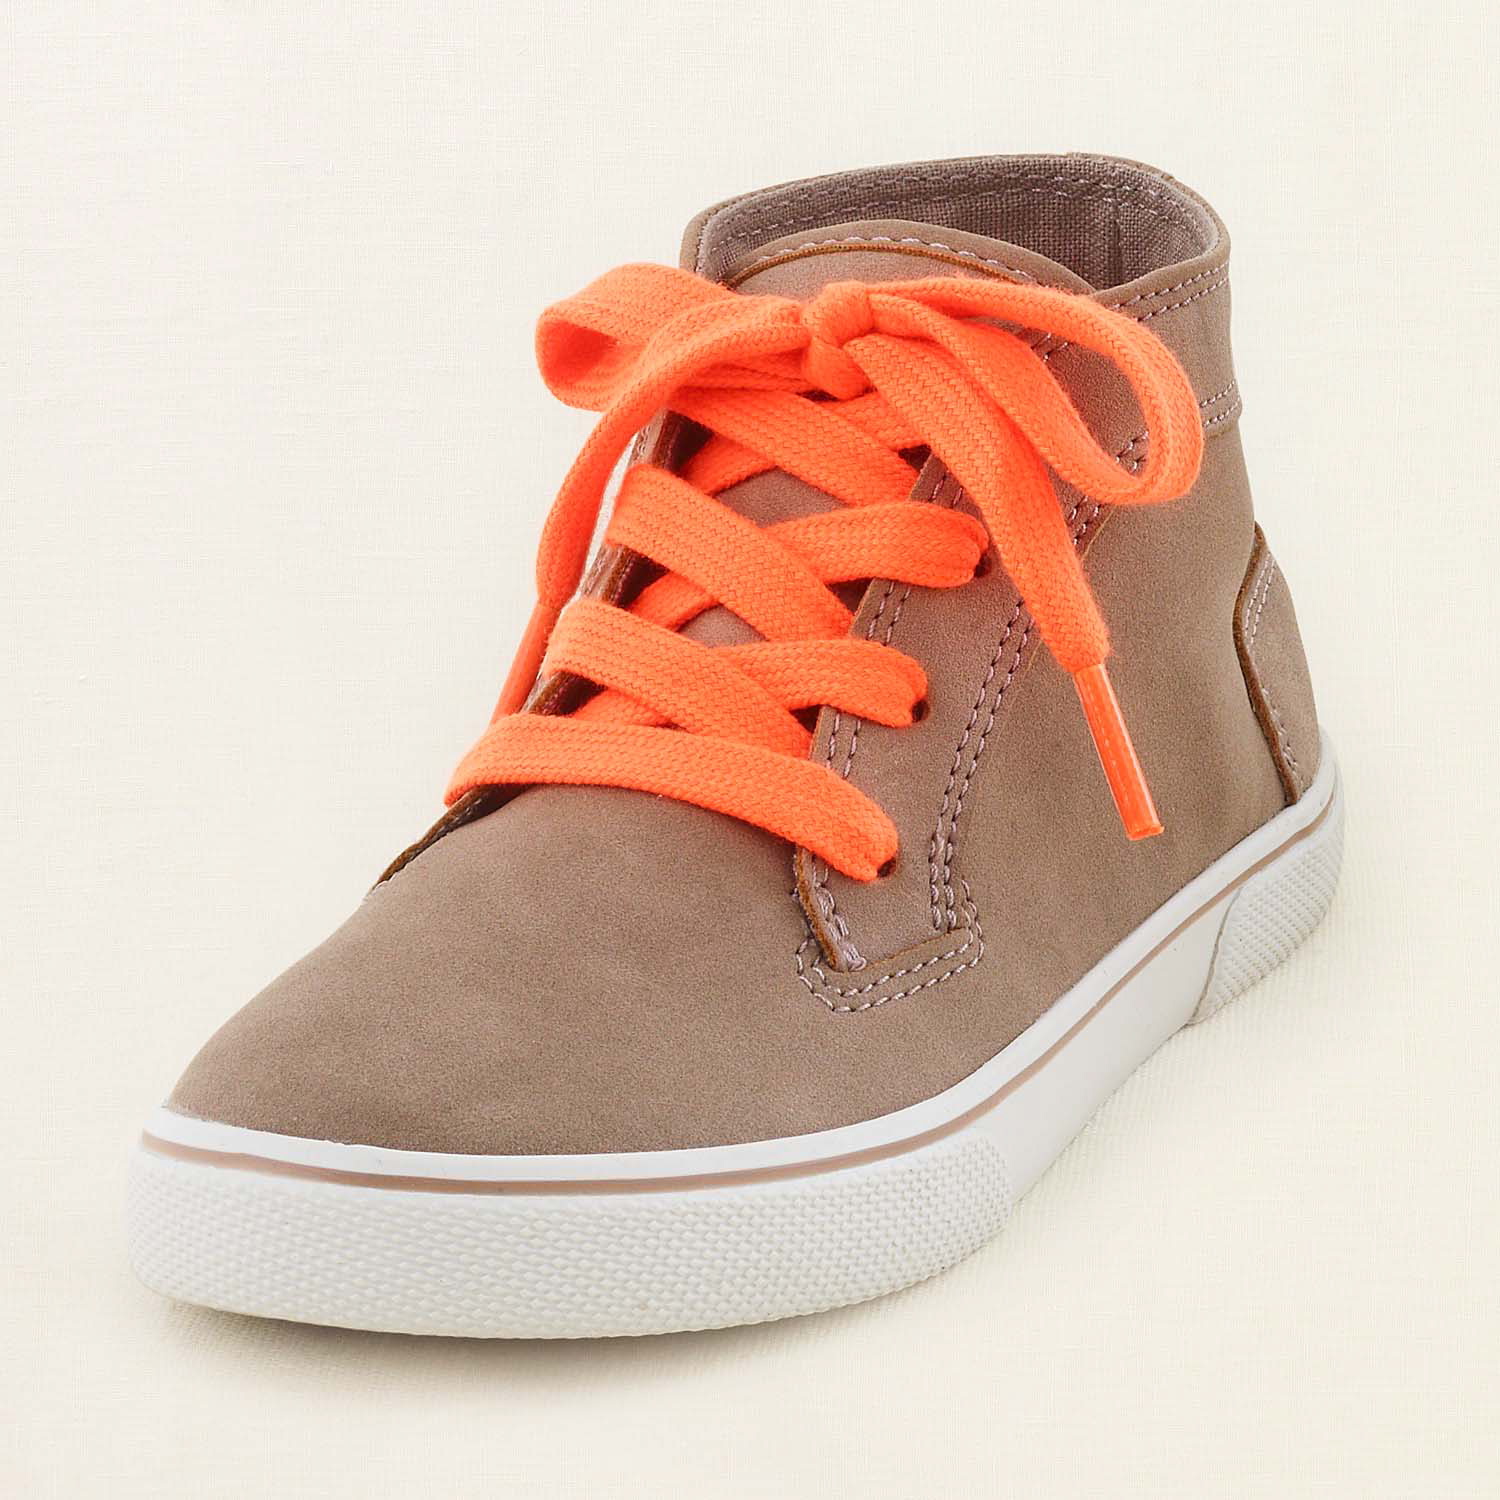 This product image released by The Children's Place shows a camel sneaker with orange neon laces. Unlike so many looks that trickled down from the designer runways into mass retailers and into teenagers' closets, the almost electrifying shades of pink, green, yellow and orange have been hanging out in high school hallways for a while. And they're back again for the new school year.